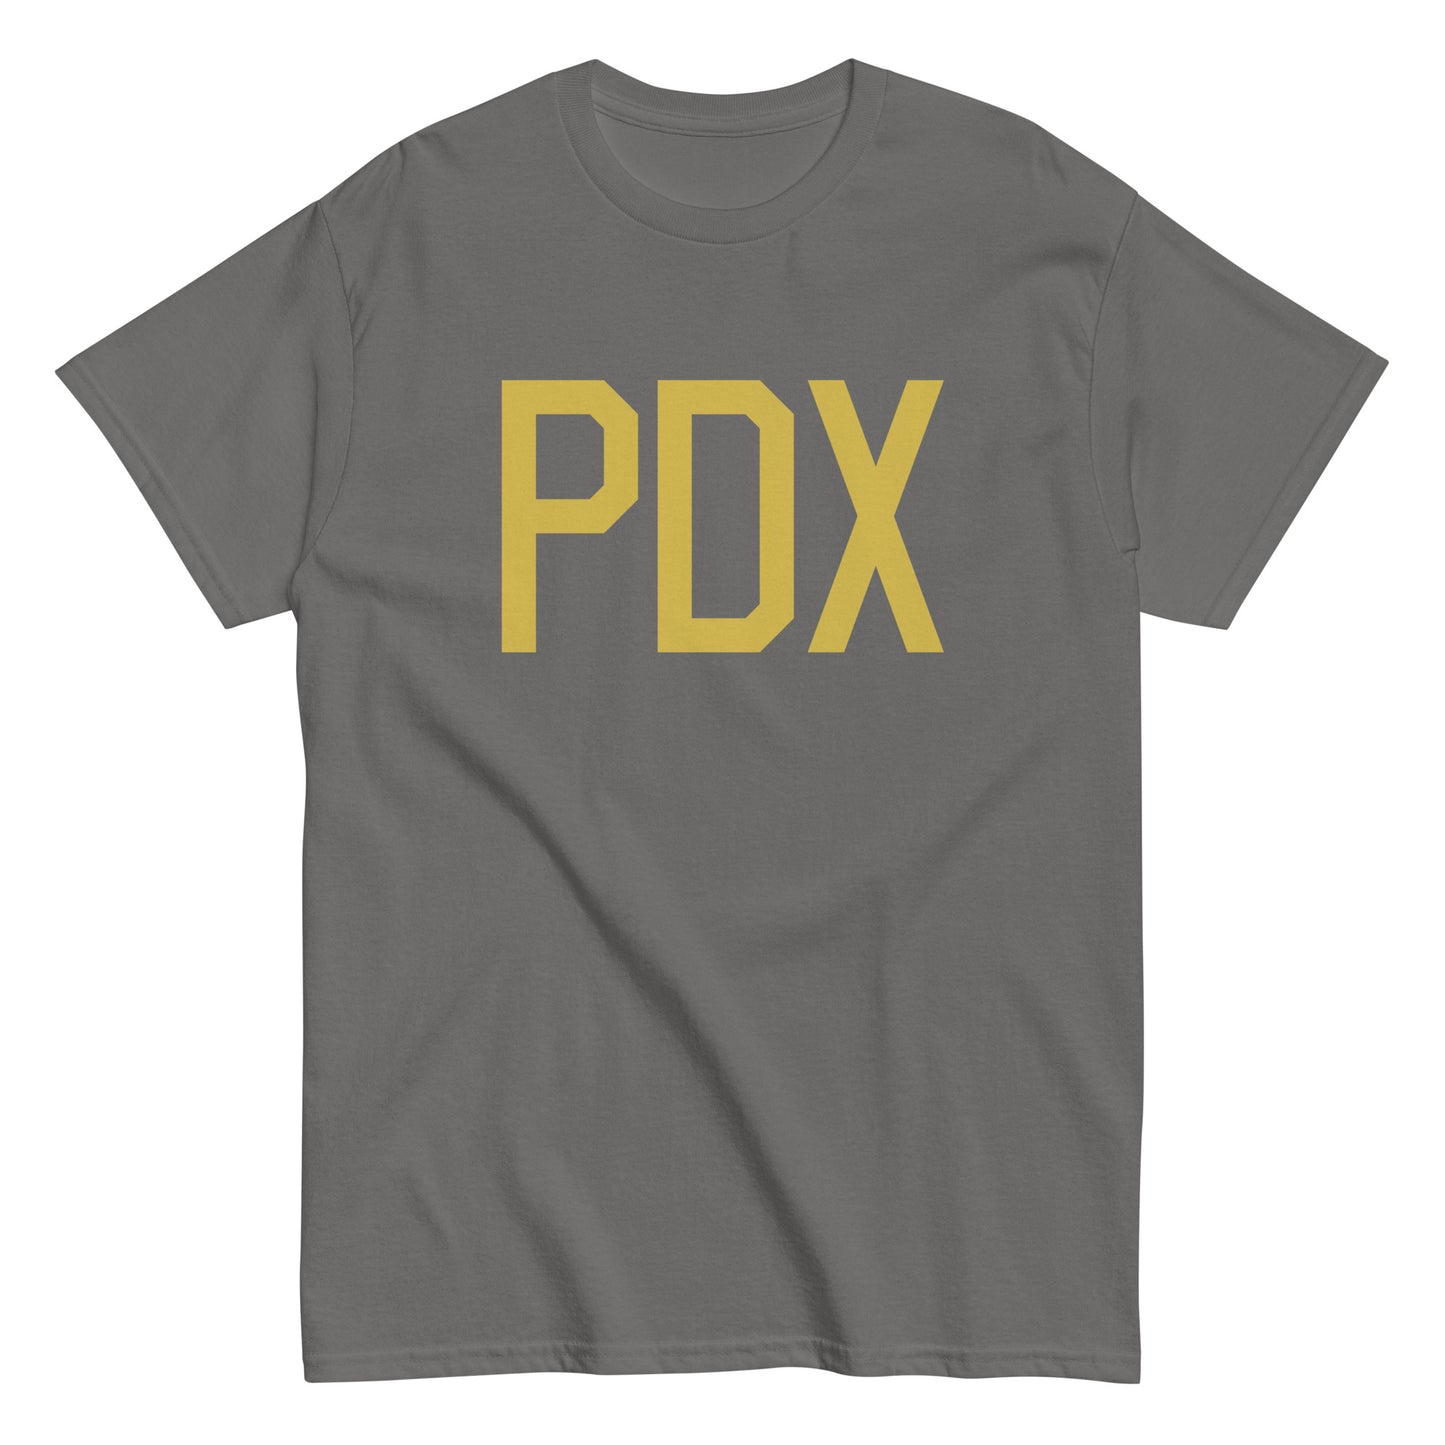 Aviation Enthusiast Men's Tee - Old Gold Graphic • PDX Portland • YHM Designs - Image 01